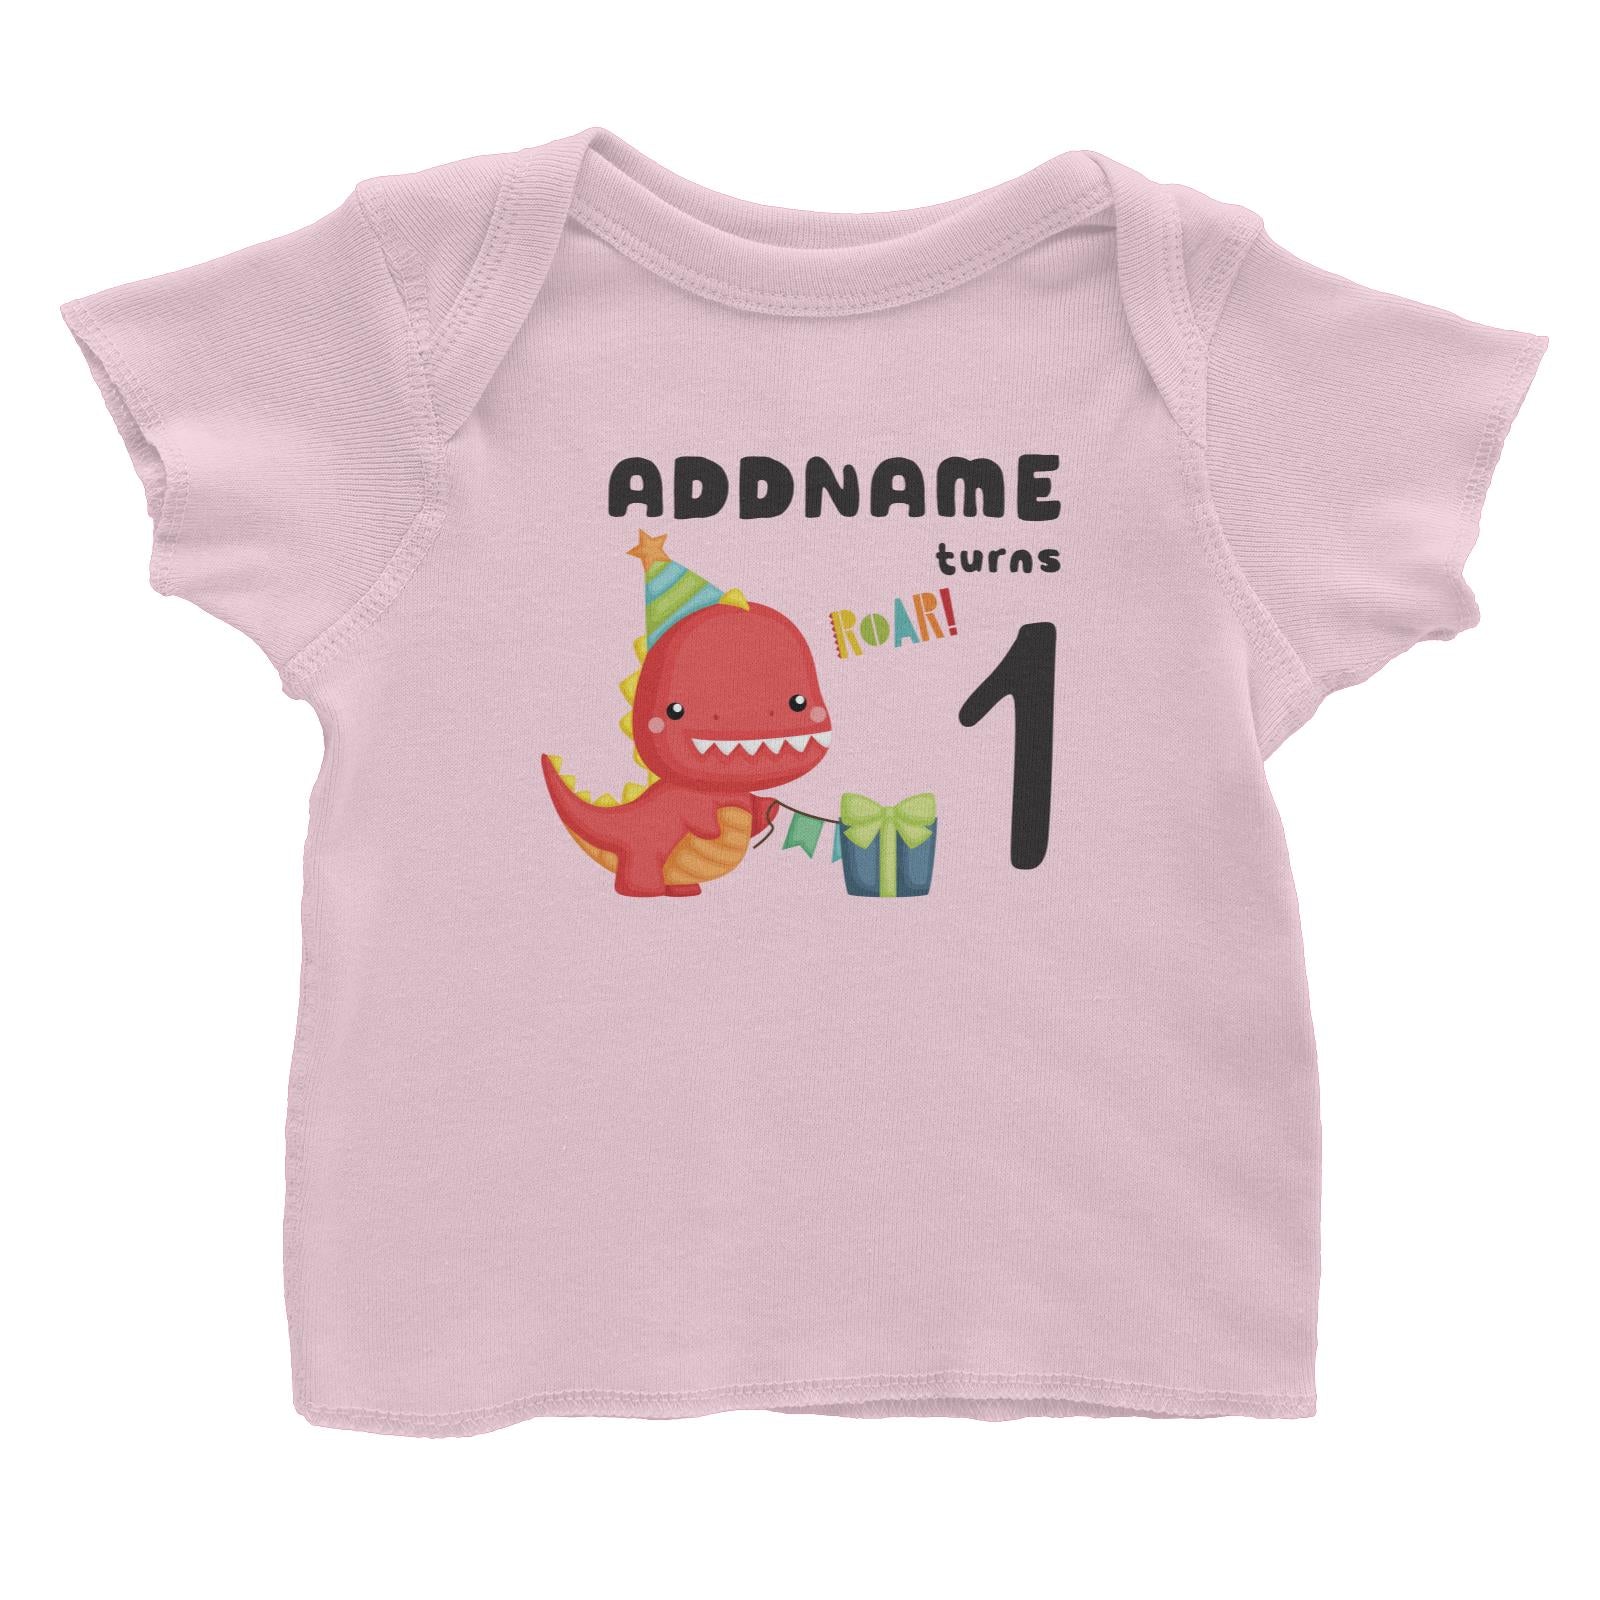 Birthday Dinosaur Happy Red Rex Wearing Party Hat Addname Turns 1 Baby T-Shirt